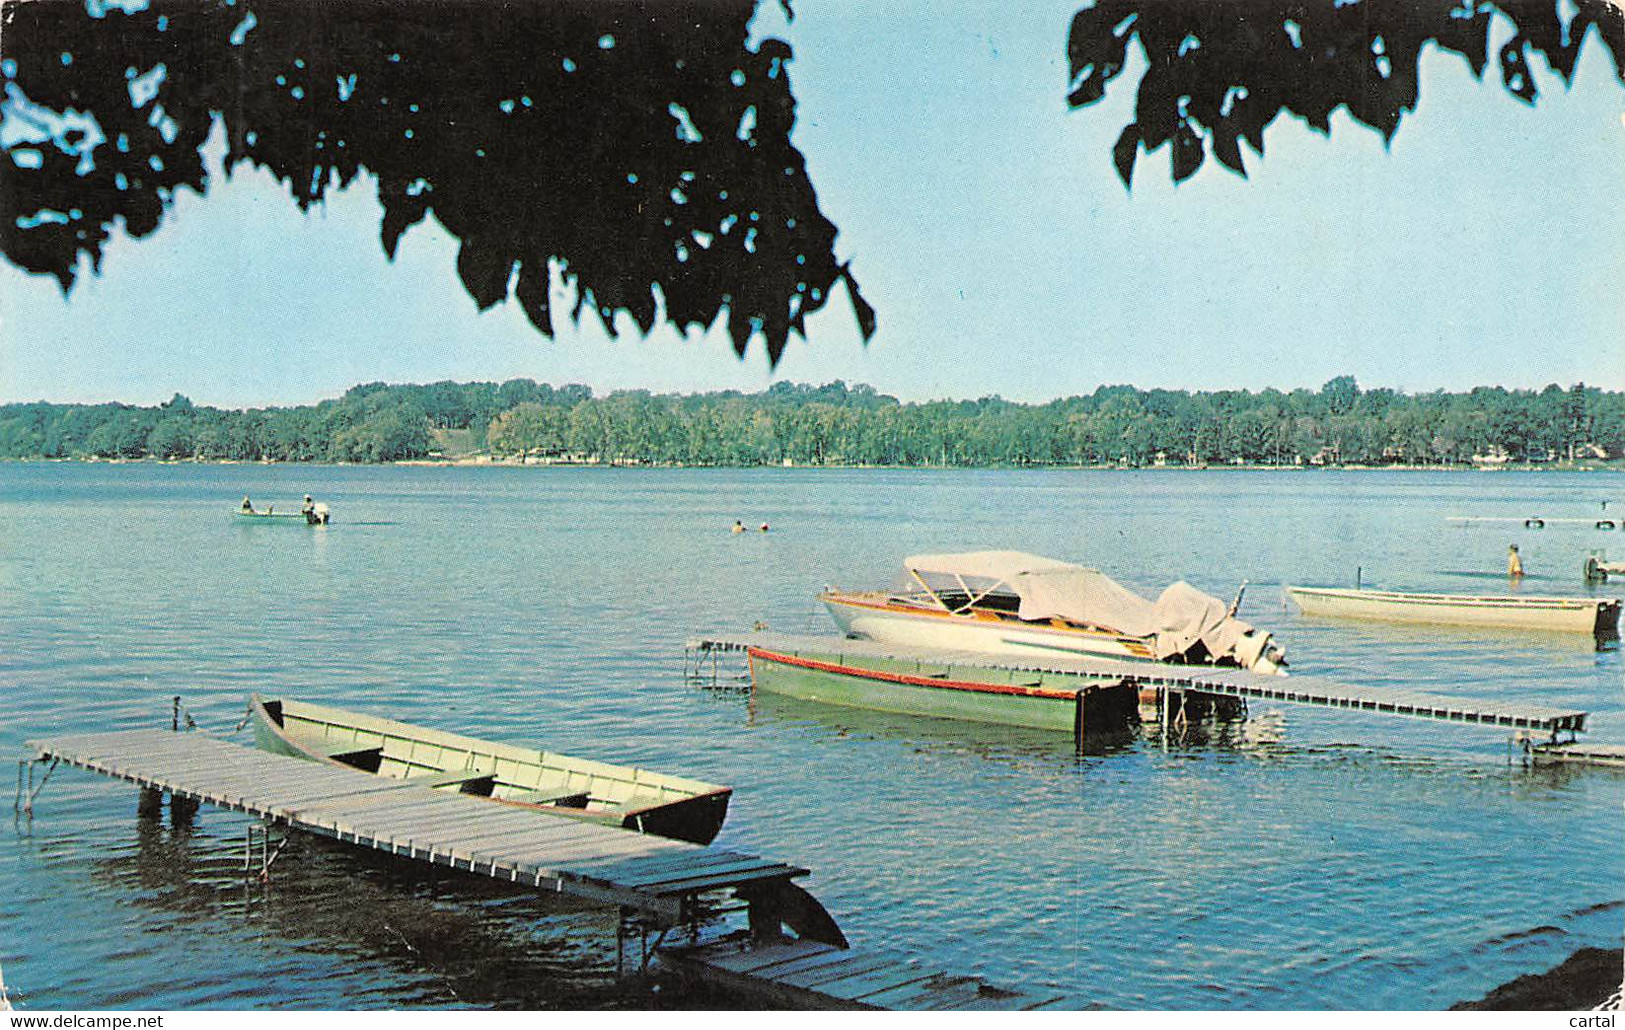 SARATOGA SPRINGS - N. Y. - Beautiful Saratoga Lake Noted For Its Excellent Fishing And Water Sports. - Saratoga Springs